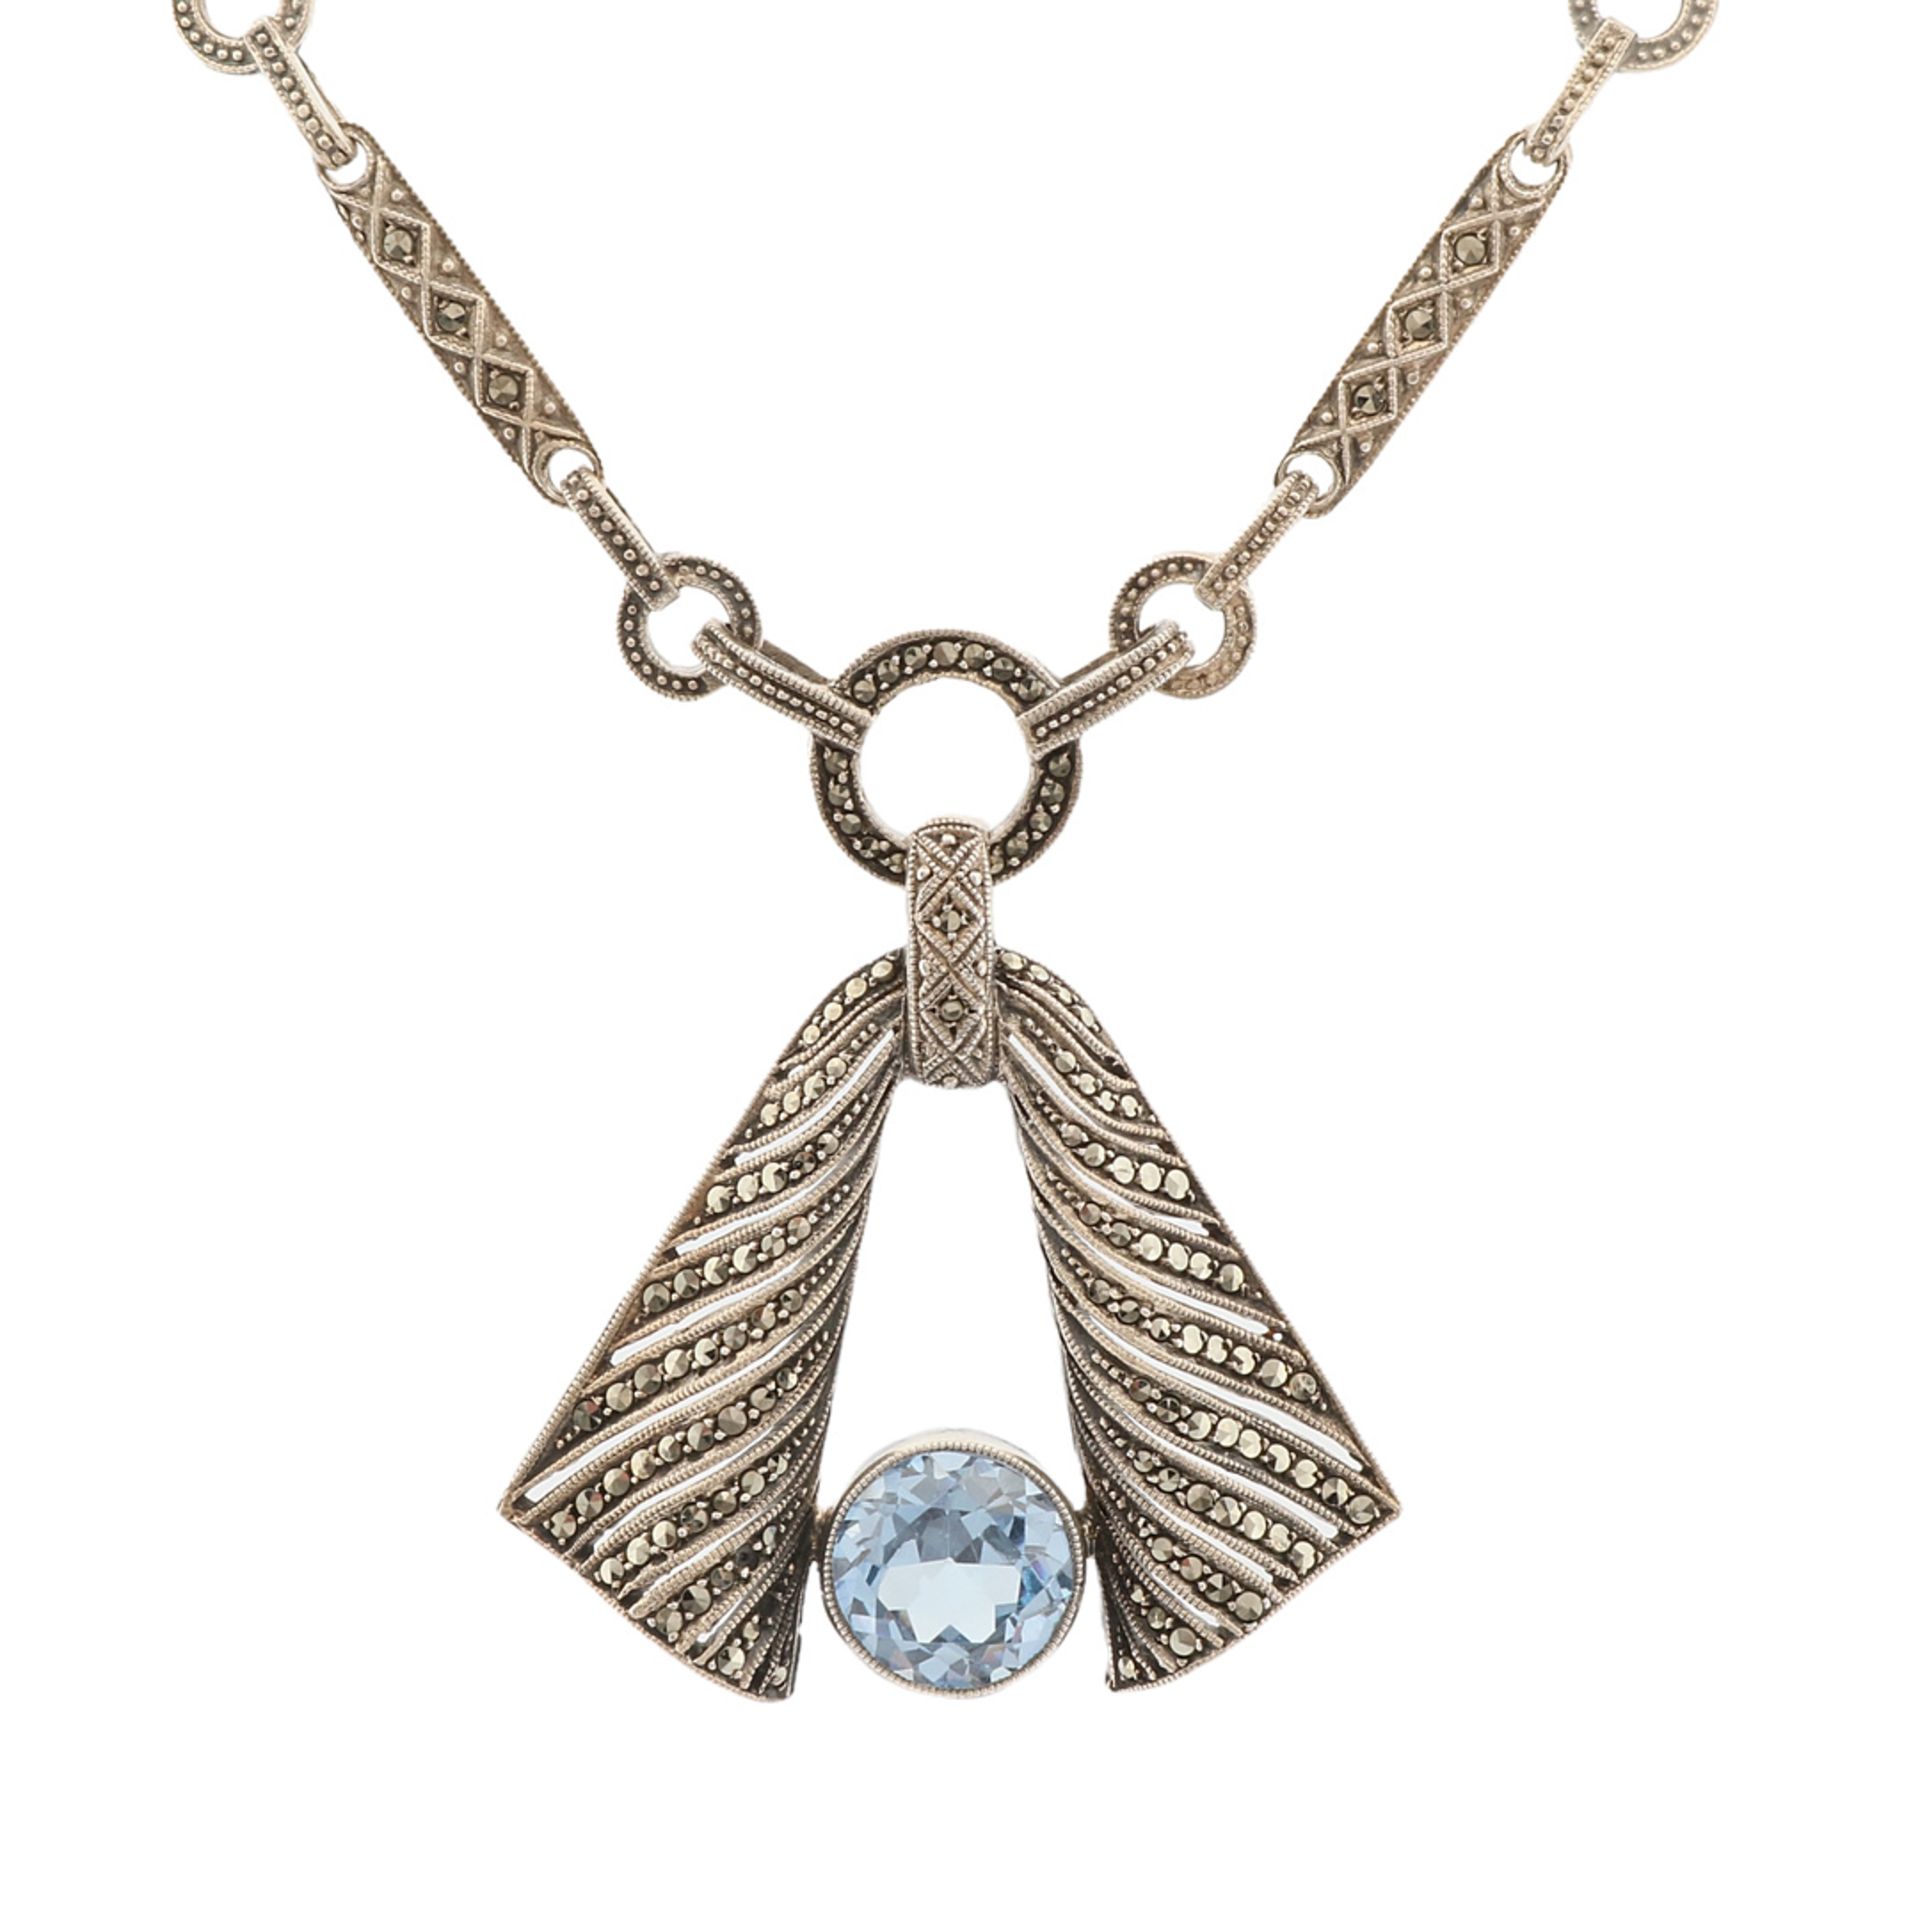 Theodor Fahrner Art Deco necklace with blue spinel and marcasites